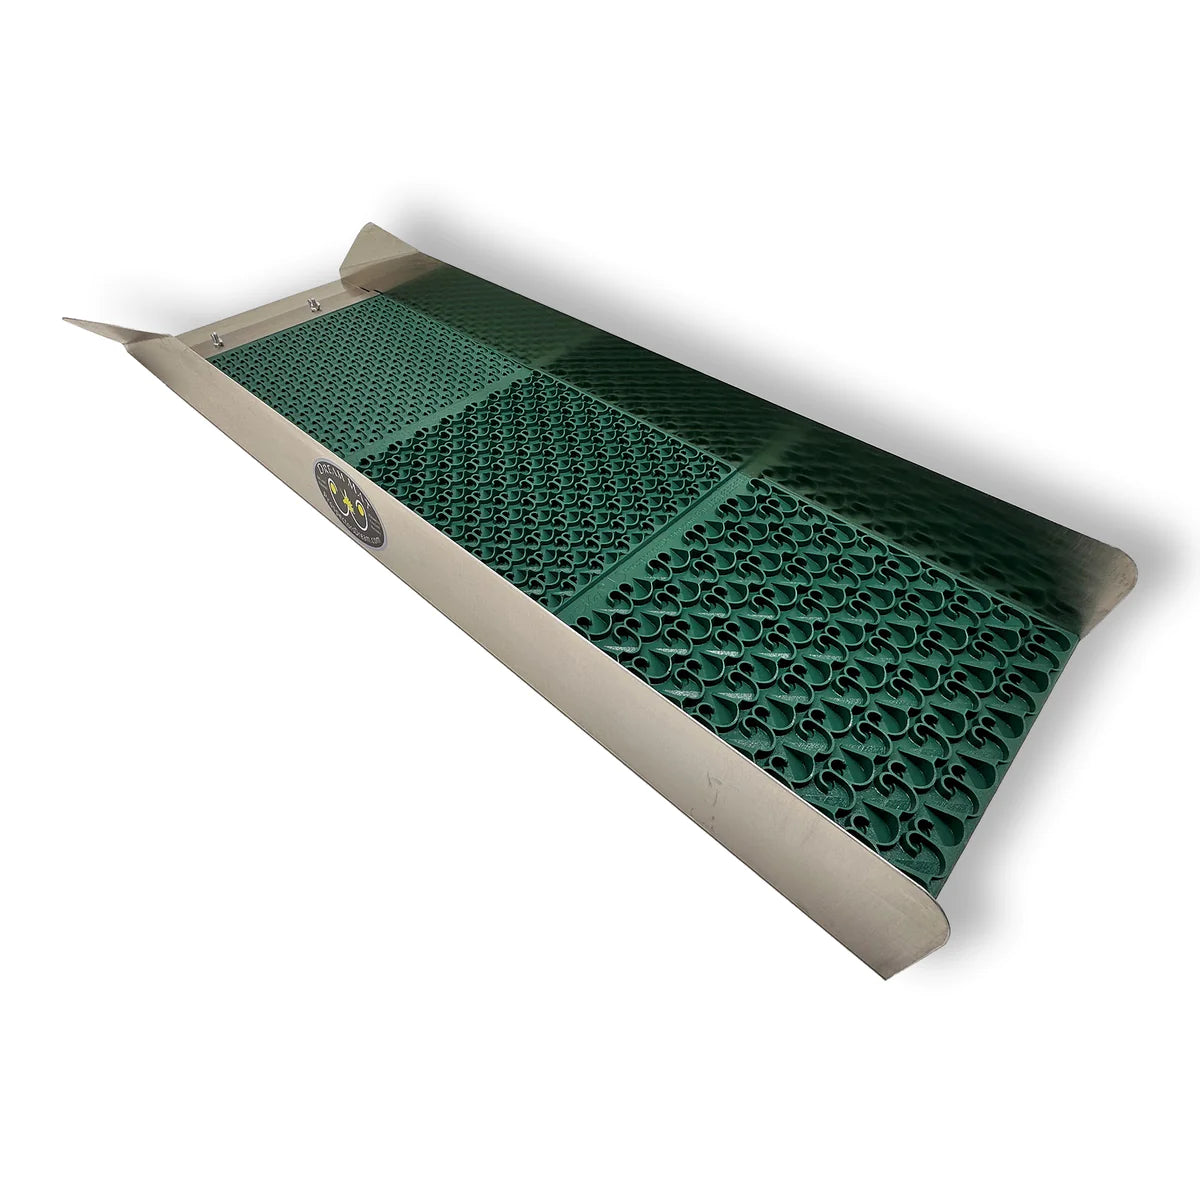 12" x 38" Compact Sluice Box with Combo Mat